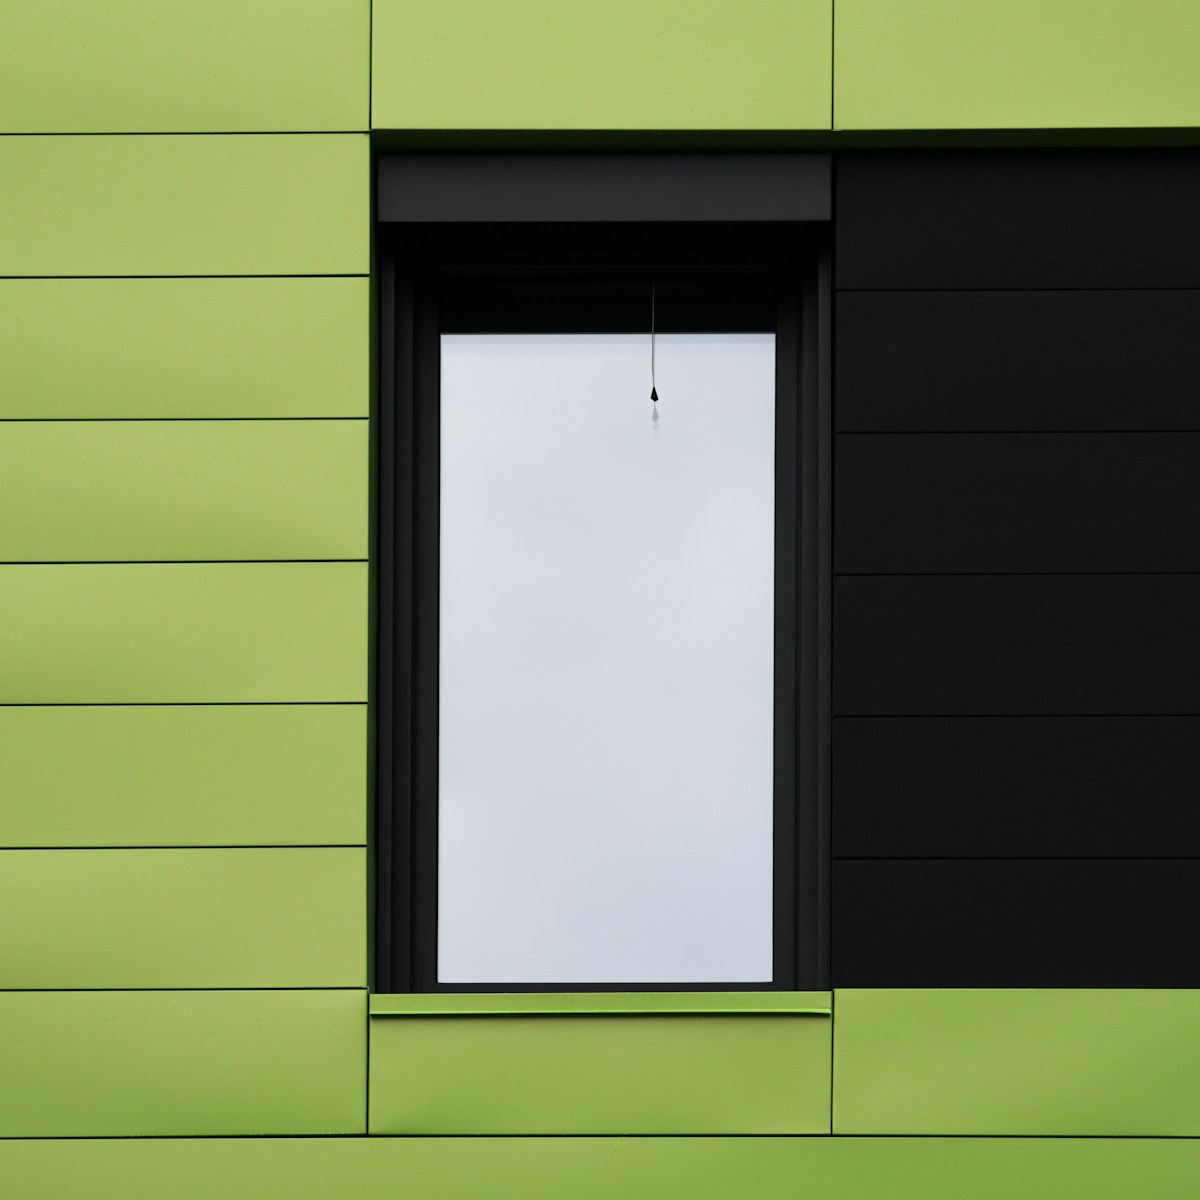 a green building with a window and a white sheet of paper hanging from the window